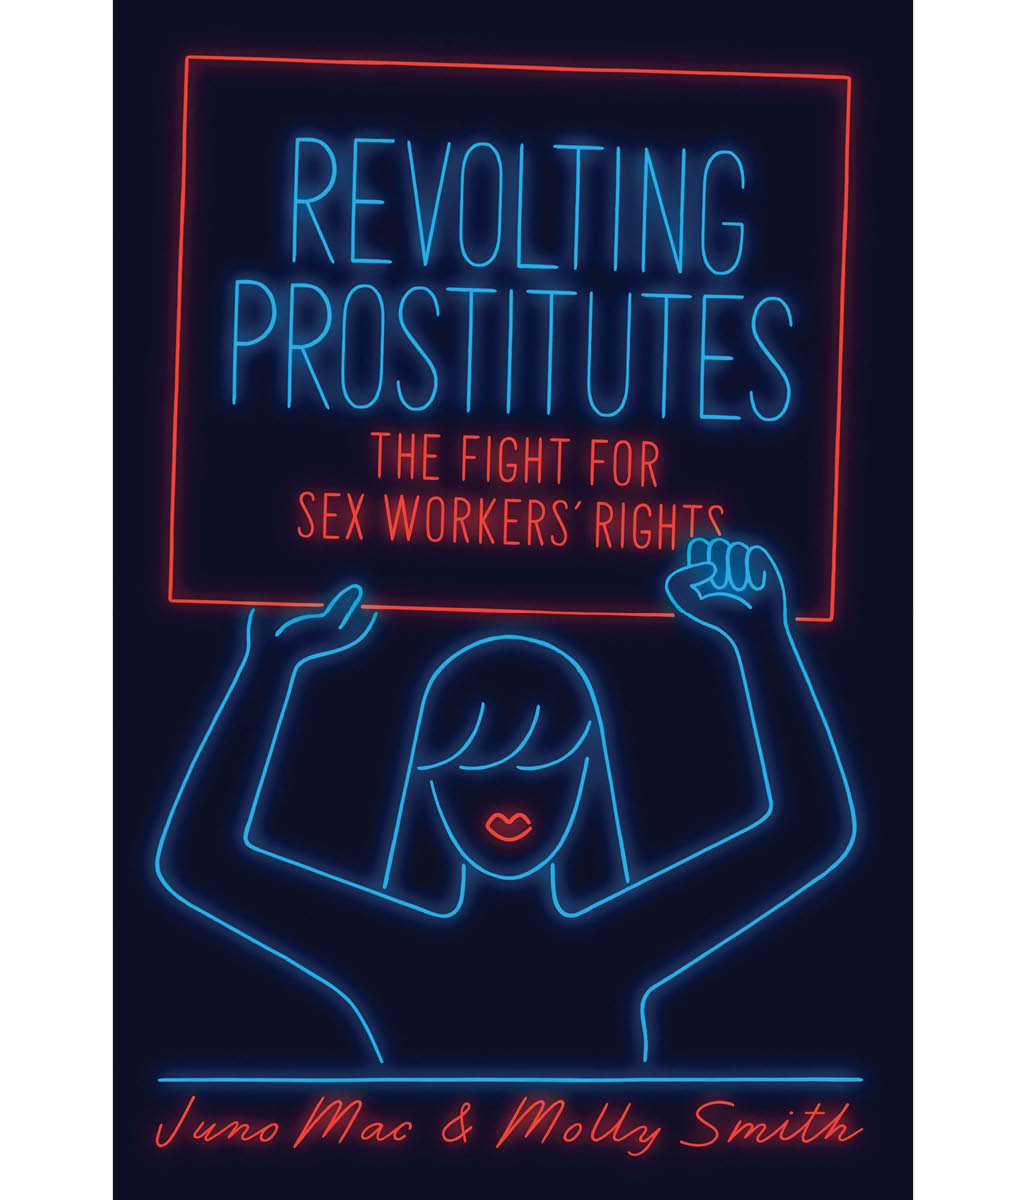 Revolting Prostitutes: The Fight for Sex Workers Rights Molly Smith, Juno Mac